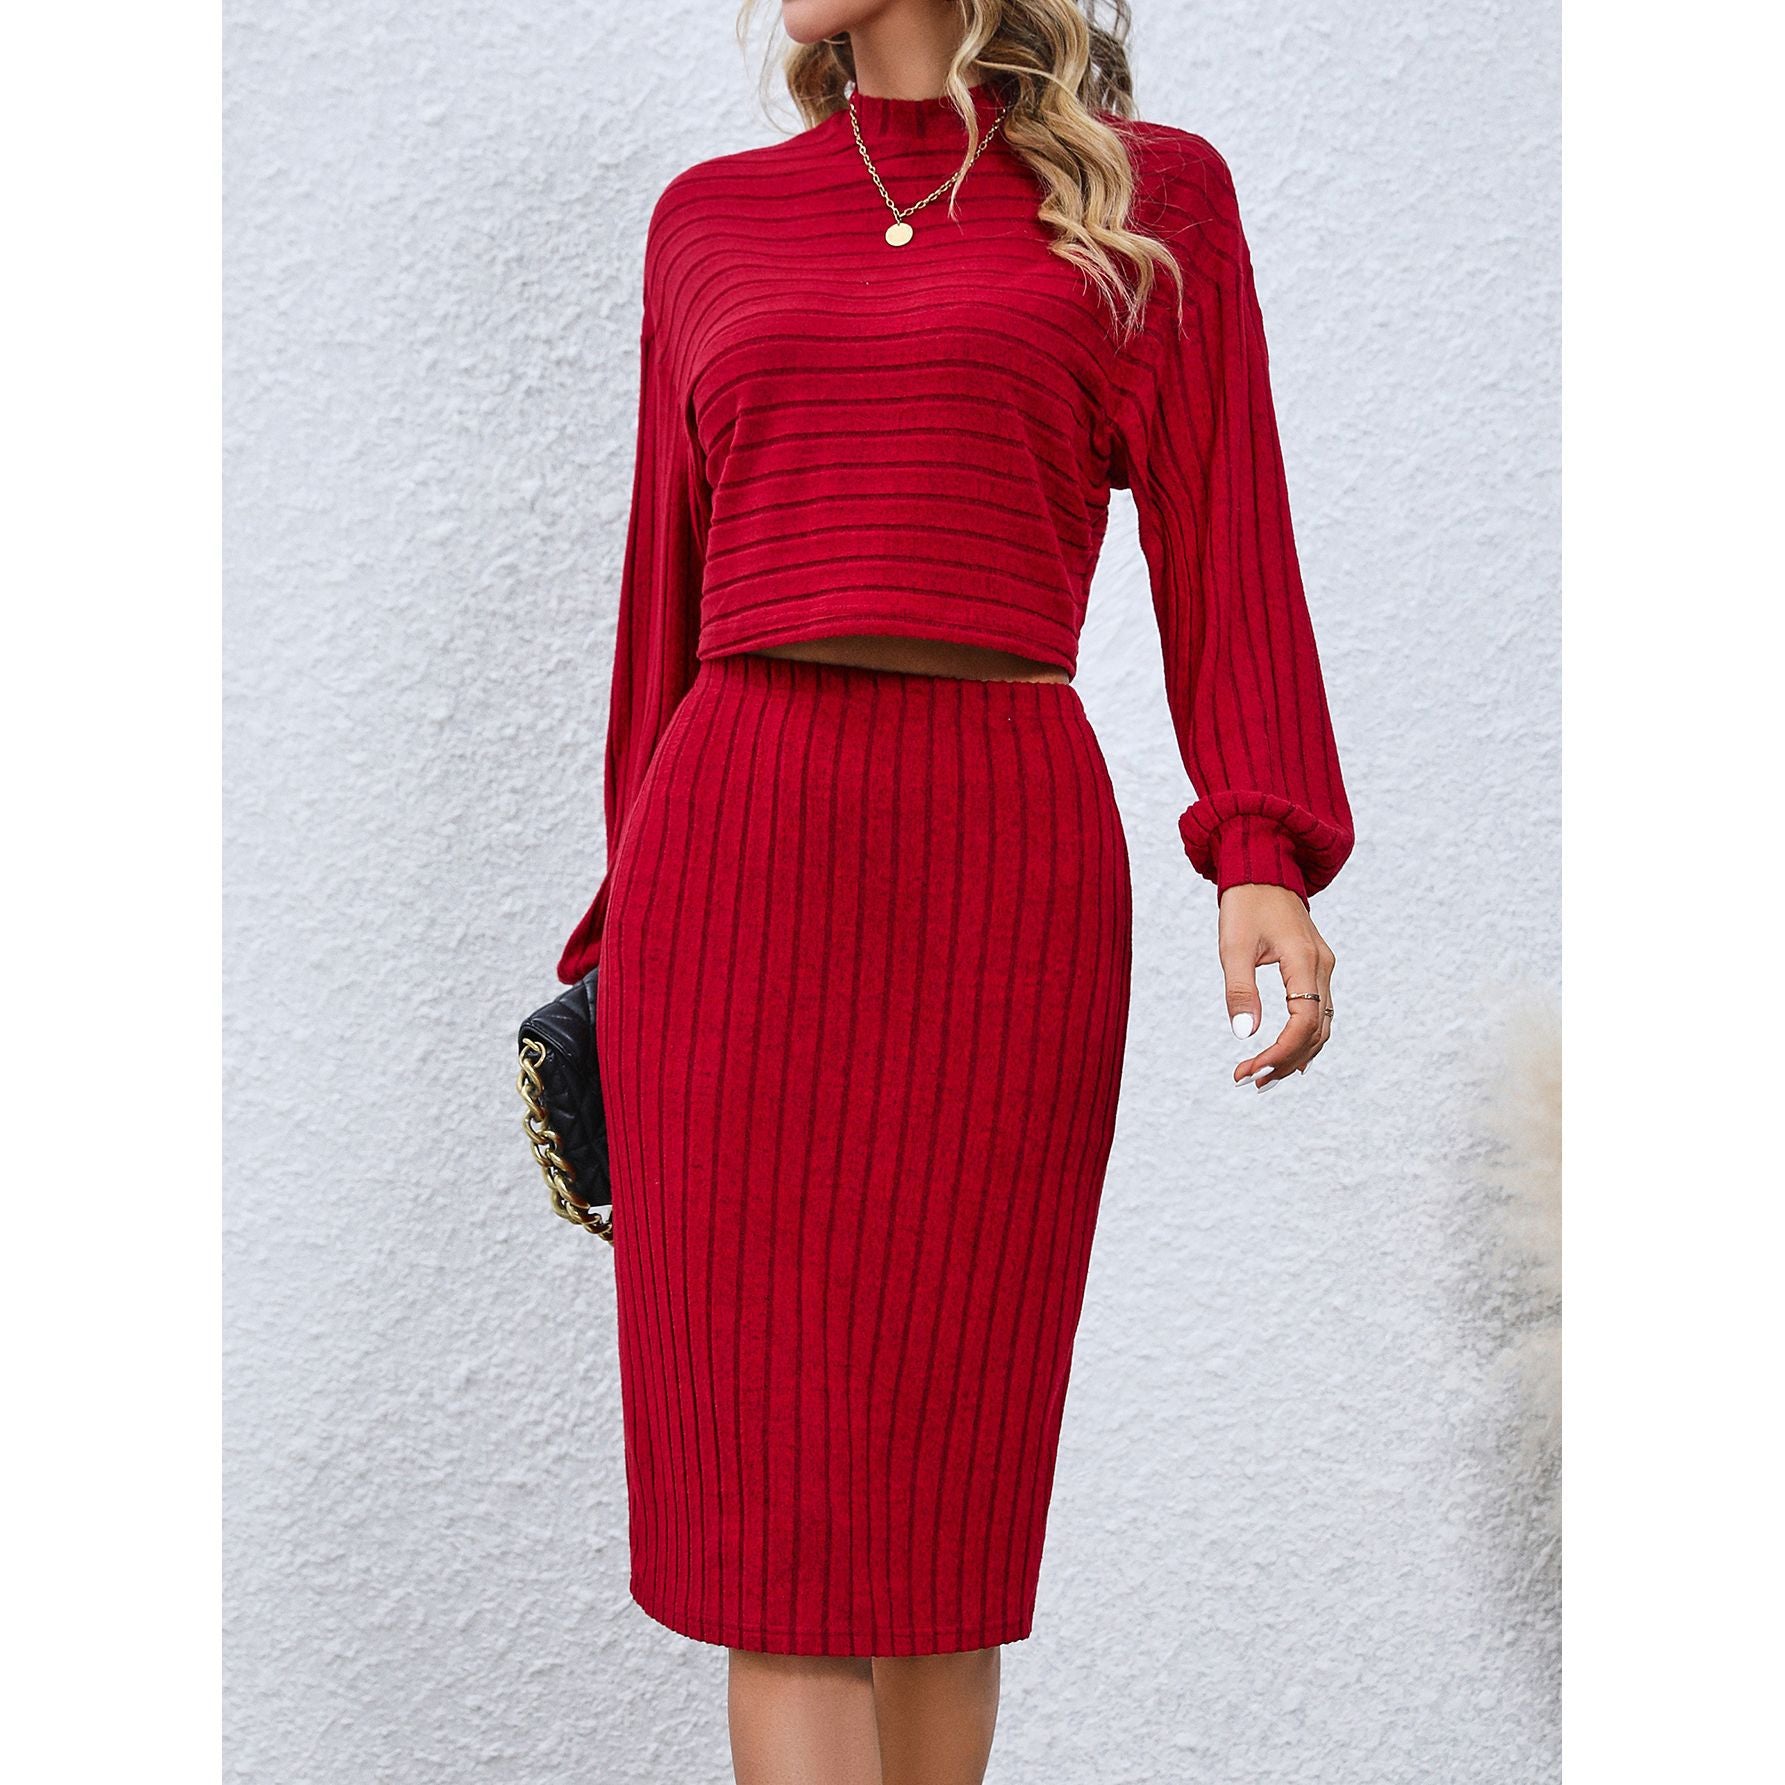 Long Sleeve Top Solid Color Hip Skirt Two Pieces